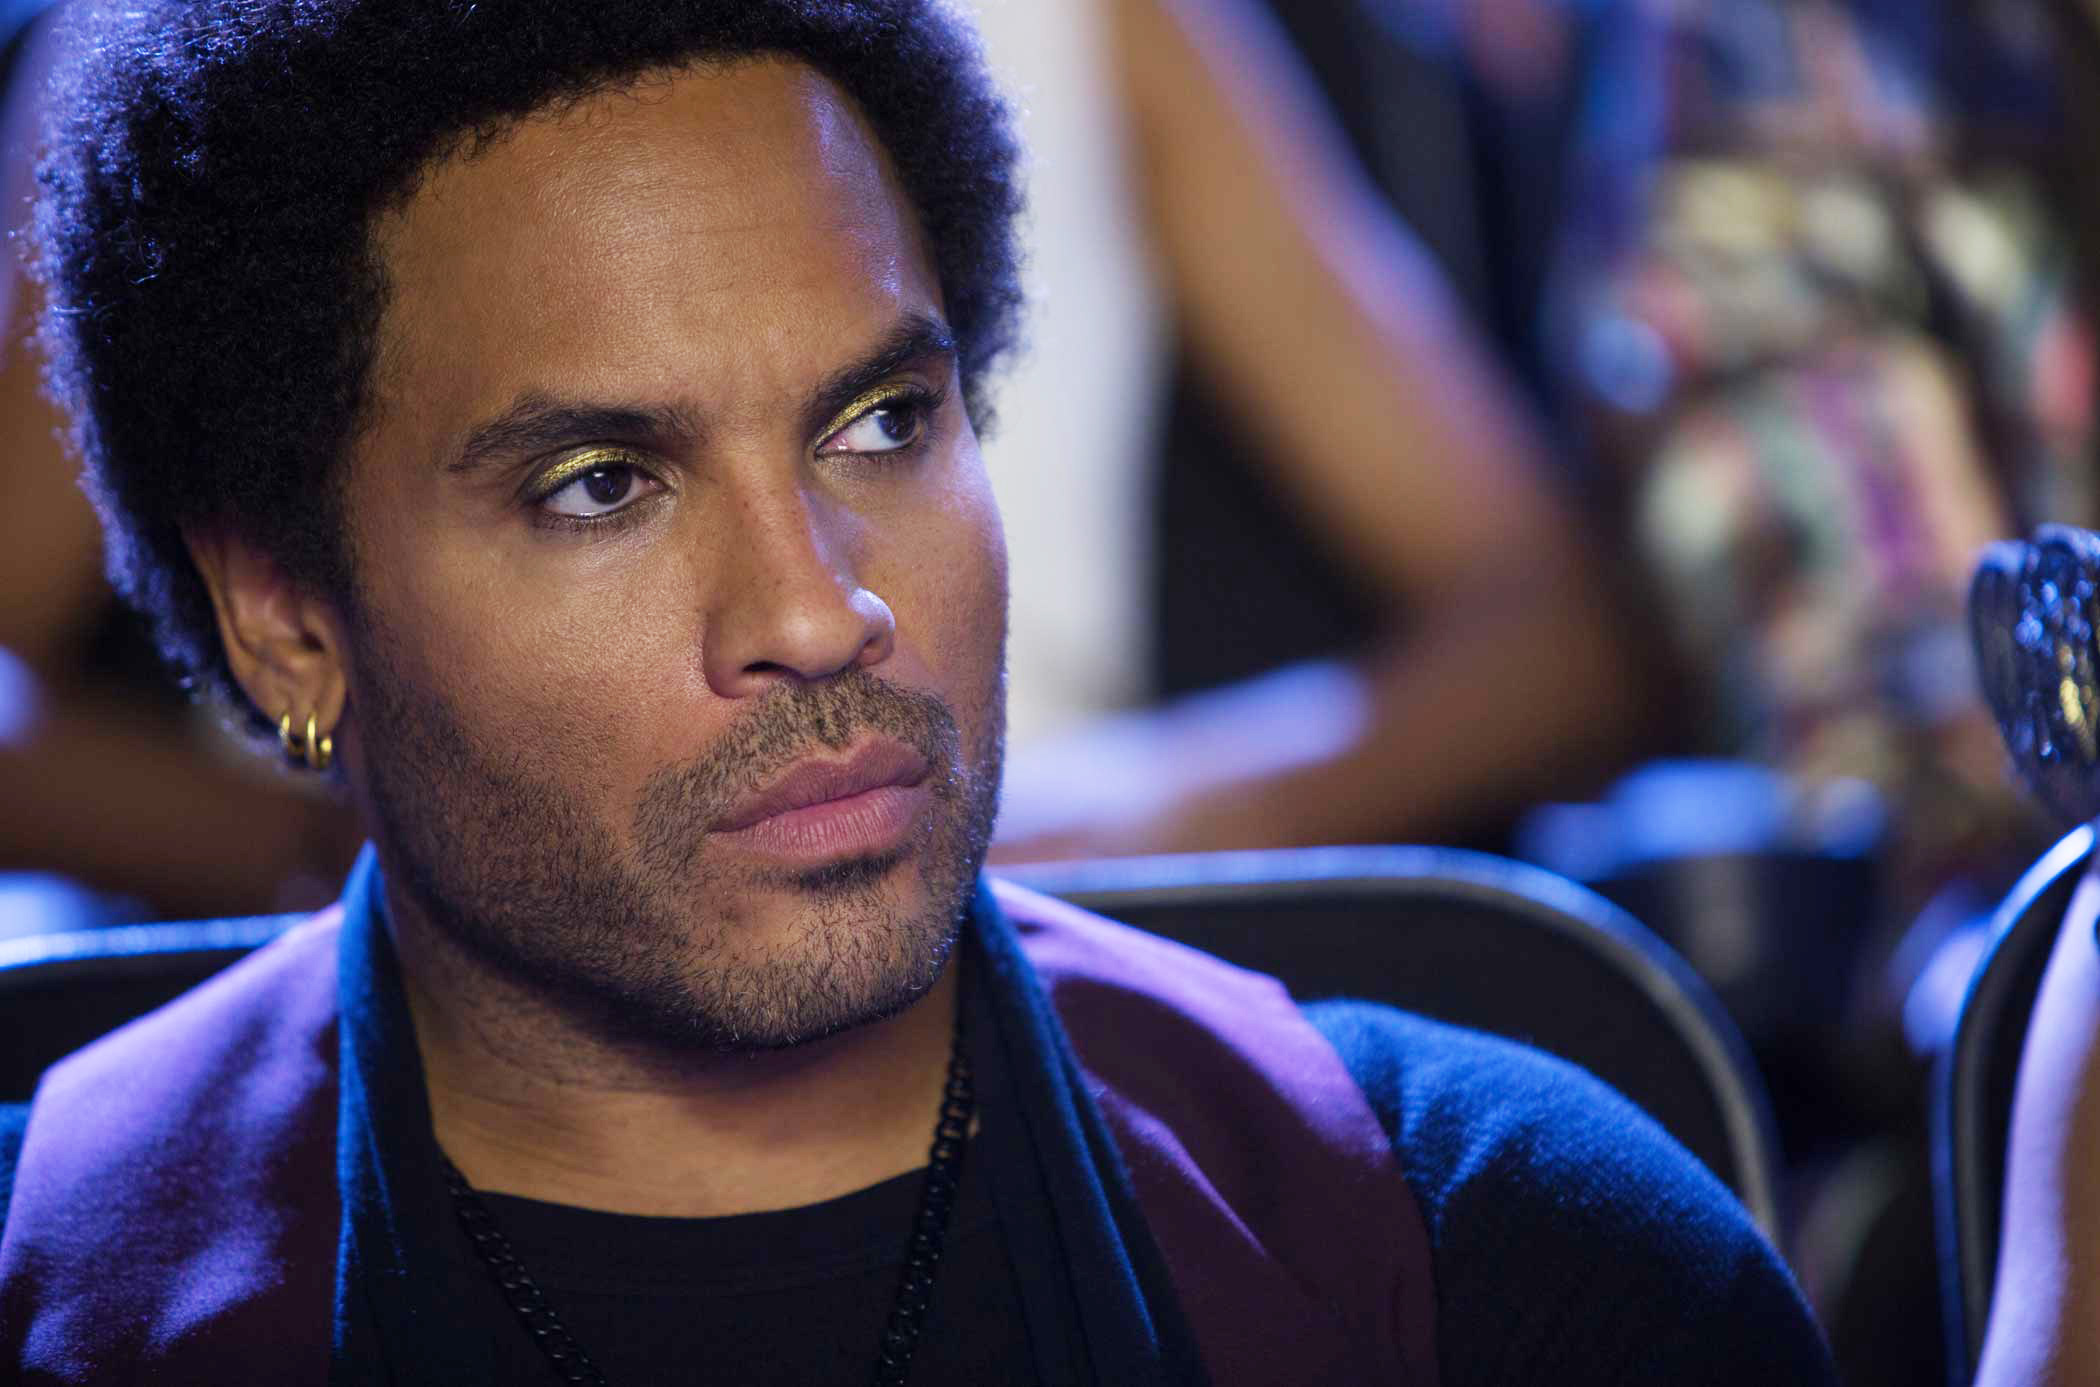 Lenny Kravitz as Cinna in The Hunger Games: Catching Fire, 2013.